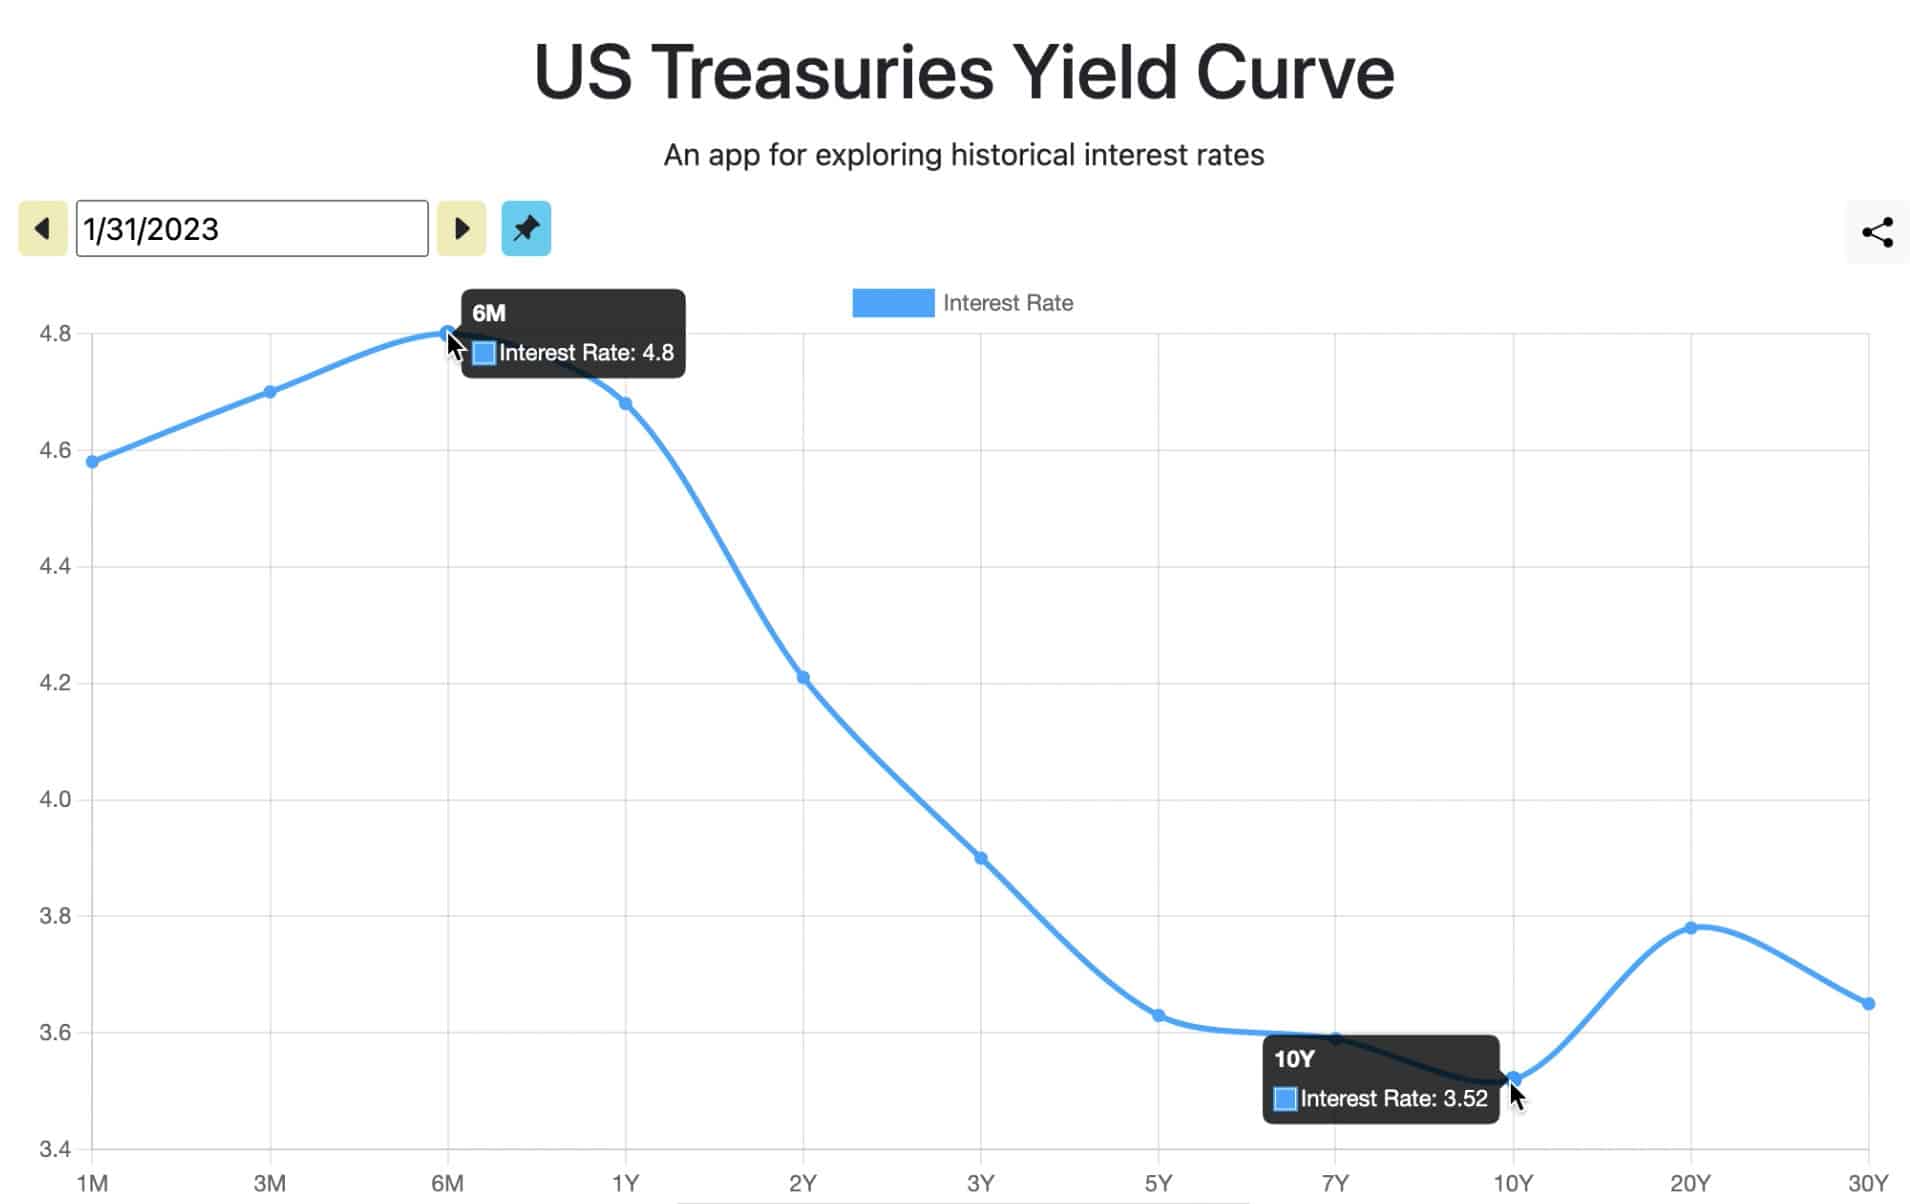 Interest Rate Increases Continue in 2023 - Treasury Yield Curve